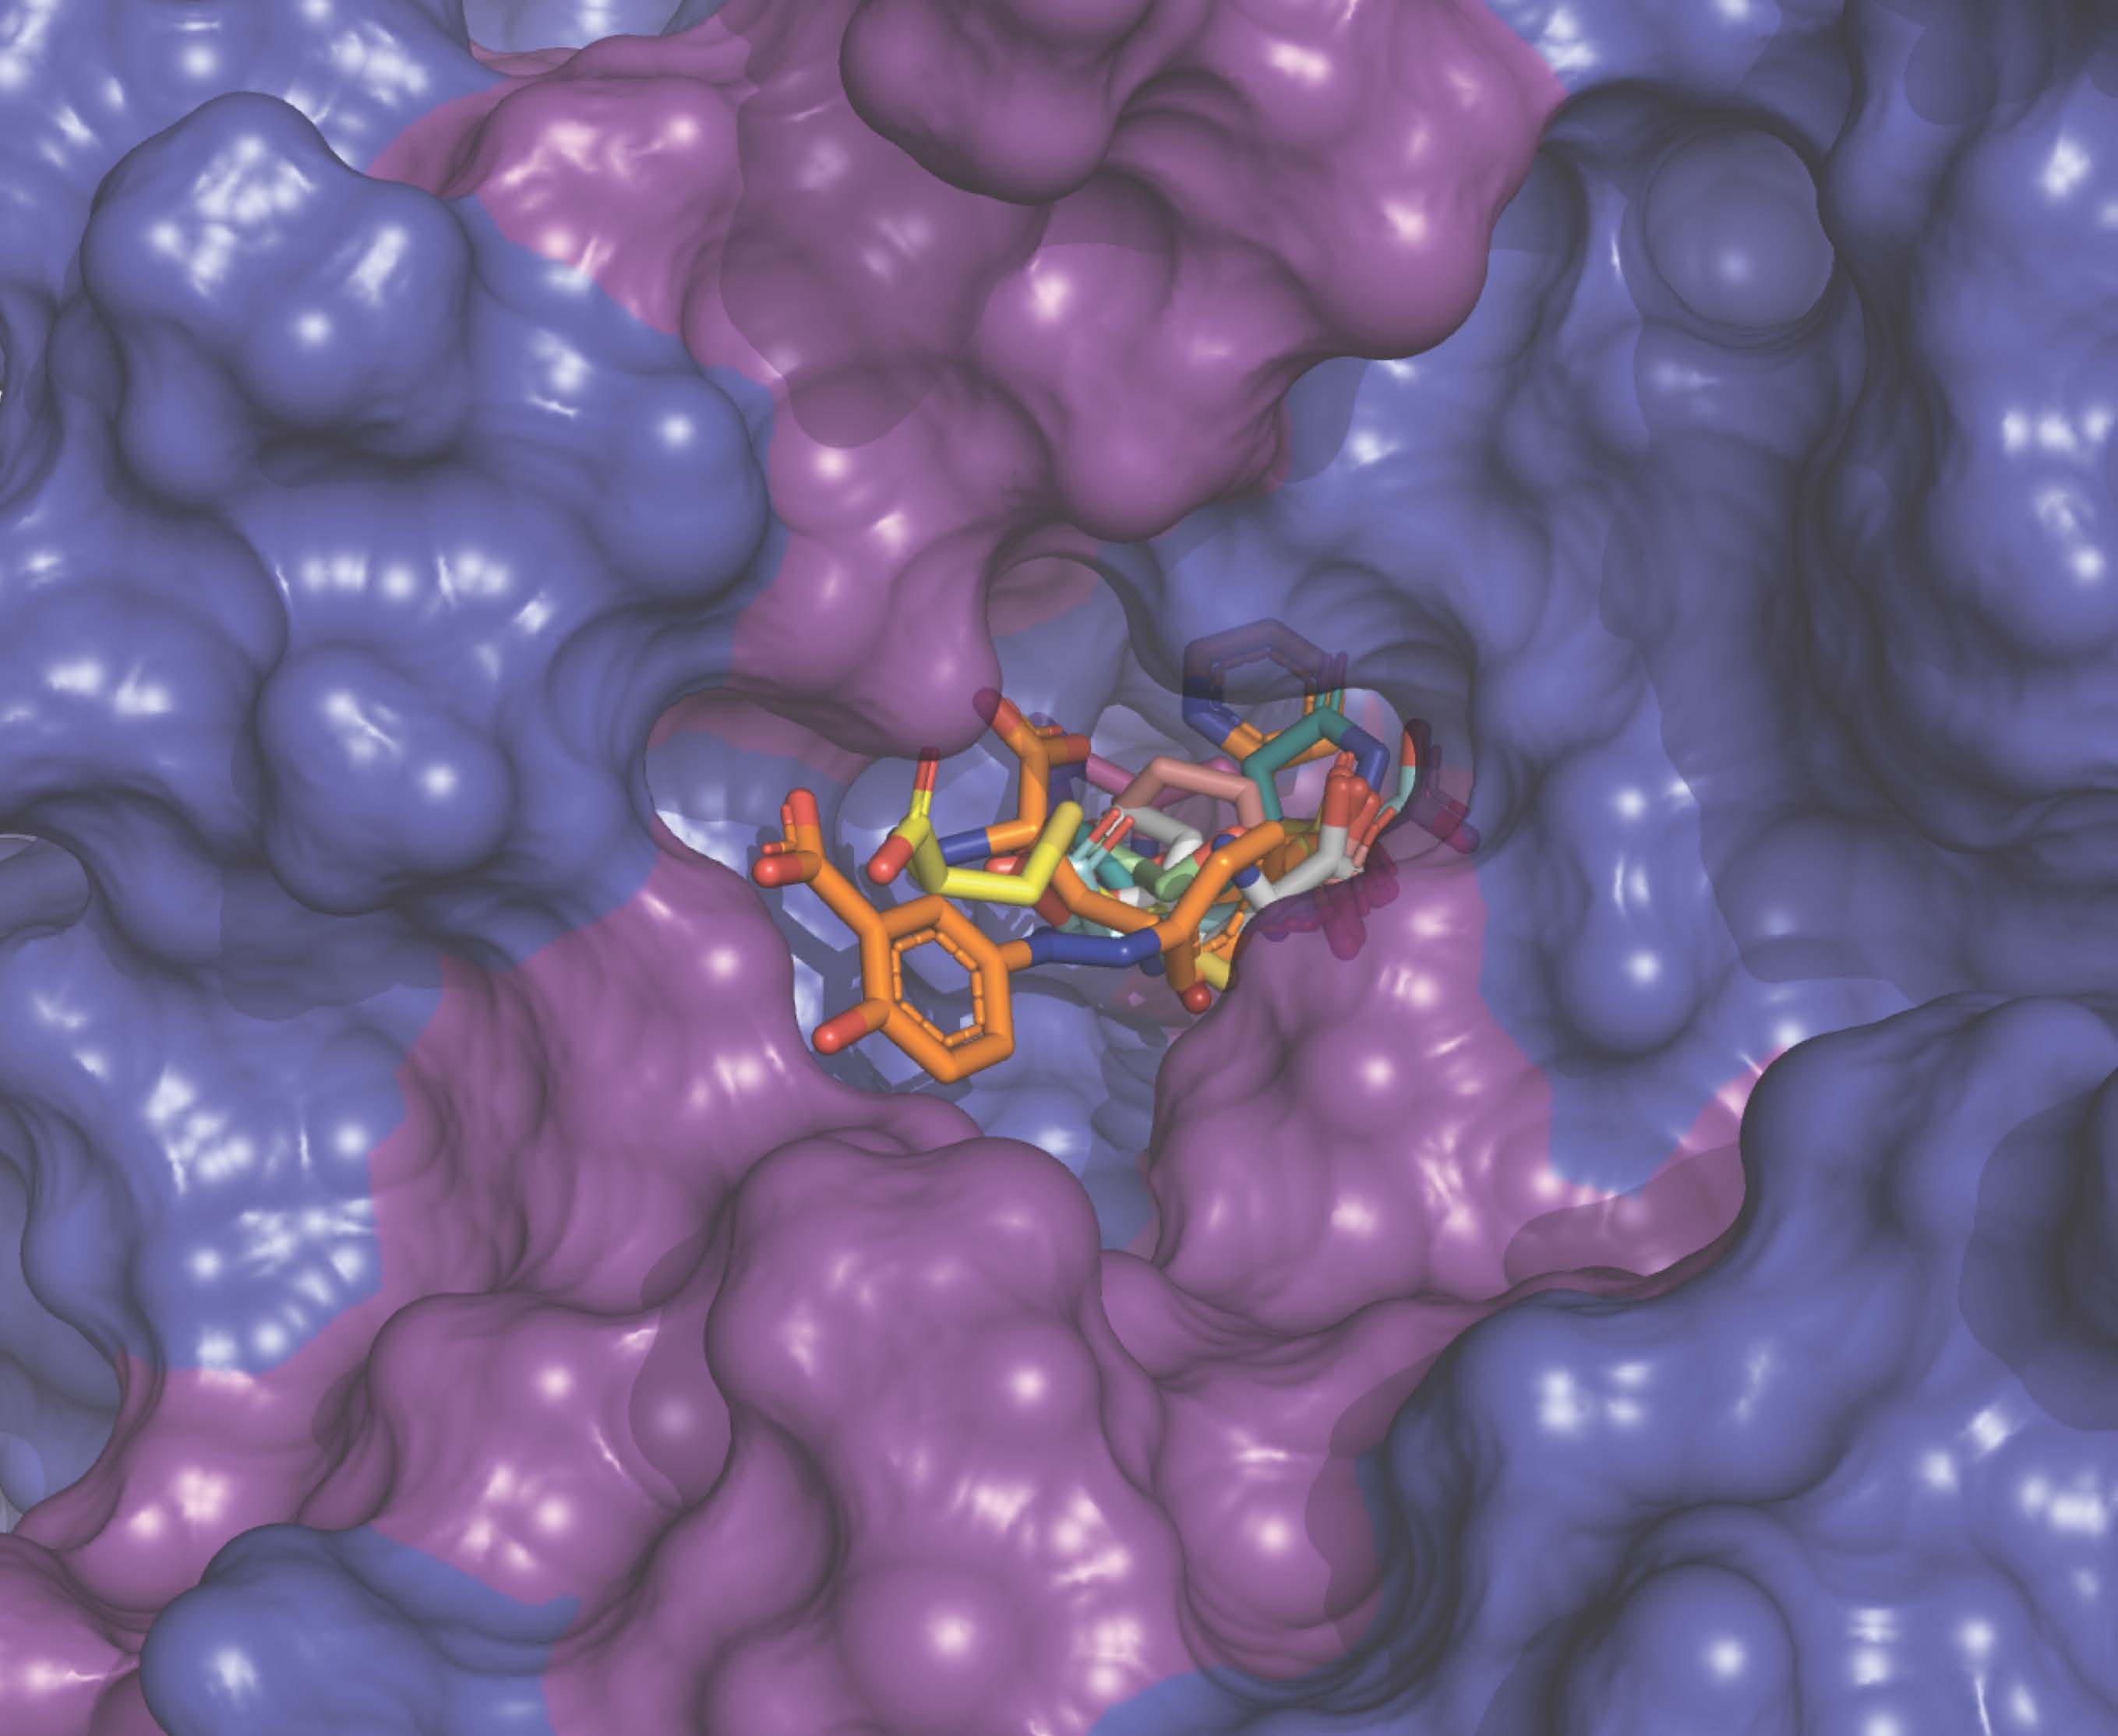 A glutamate transport protein is depicted as a trimer embedded in a lipd membrane with a bound inhibitor.